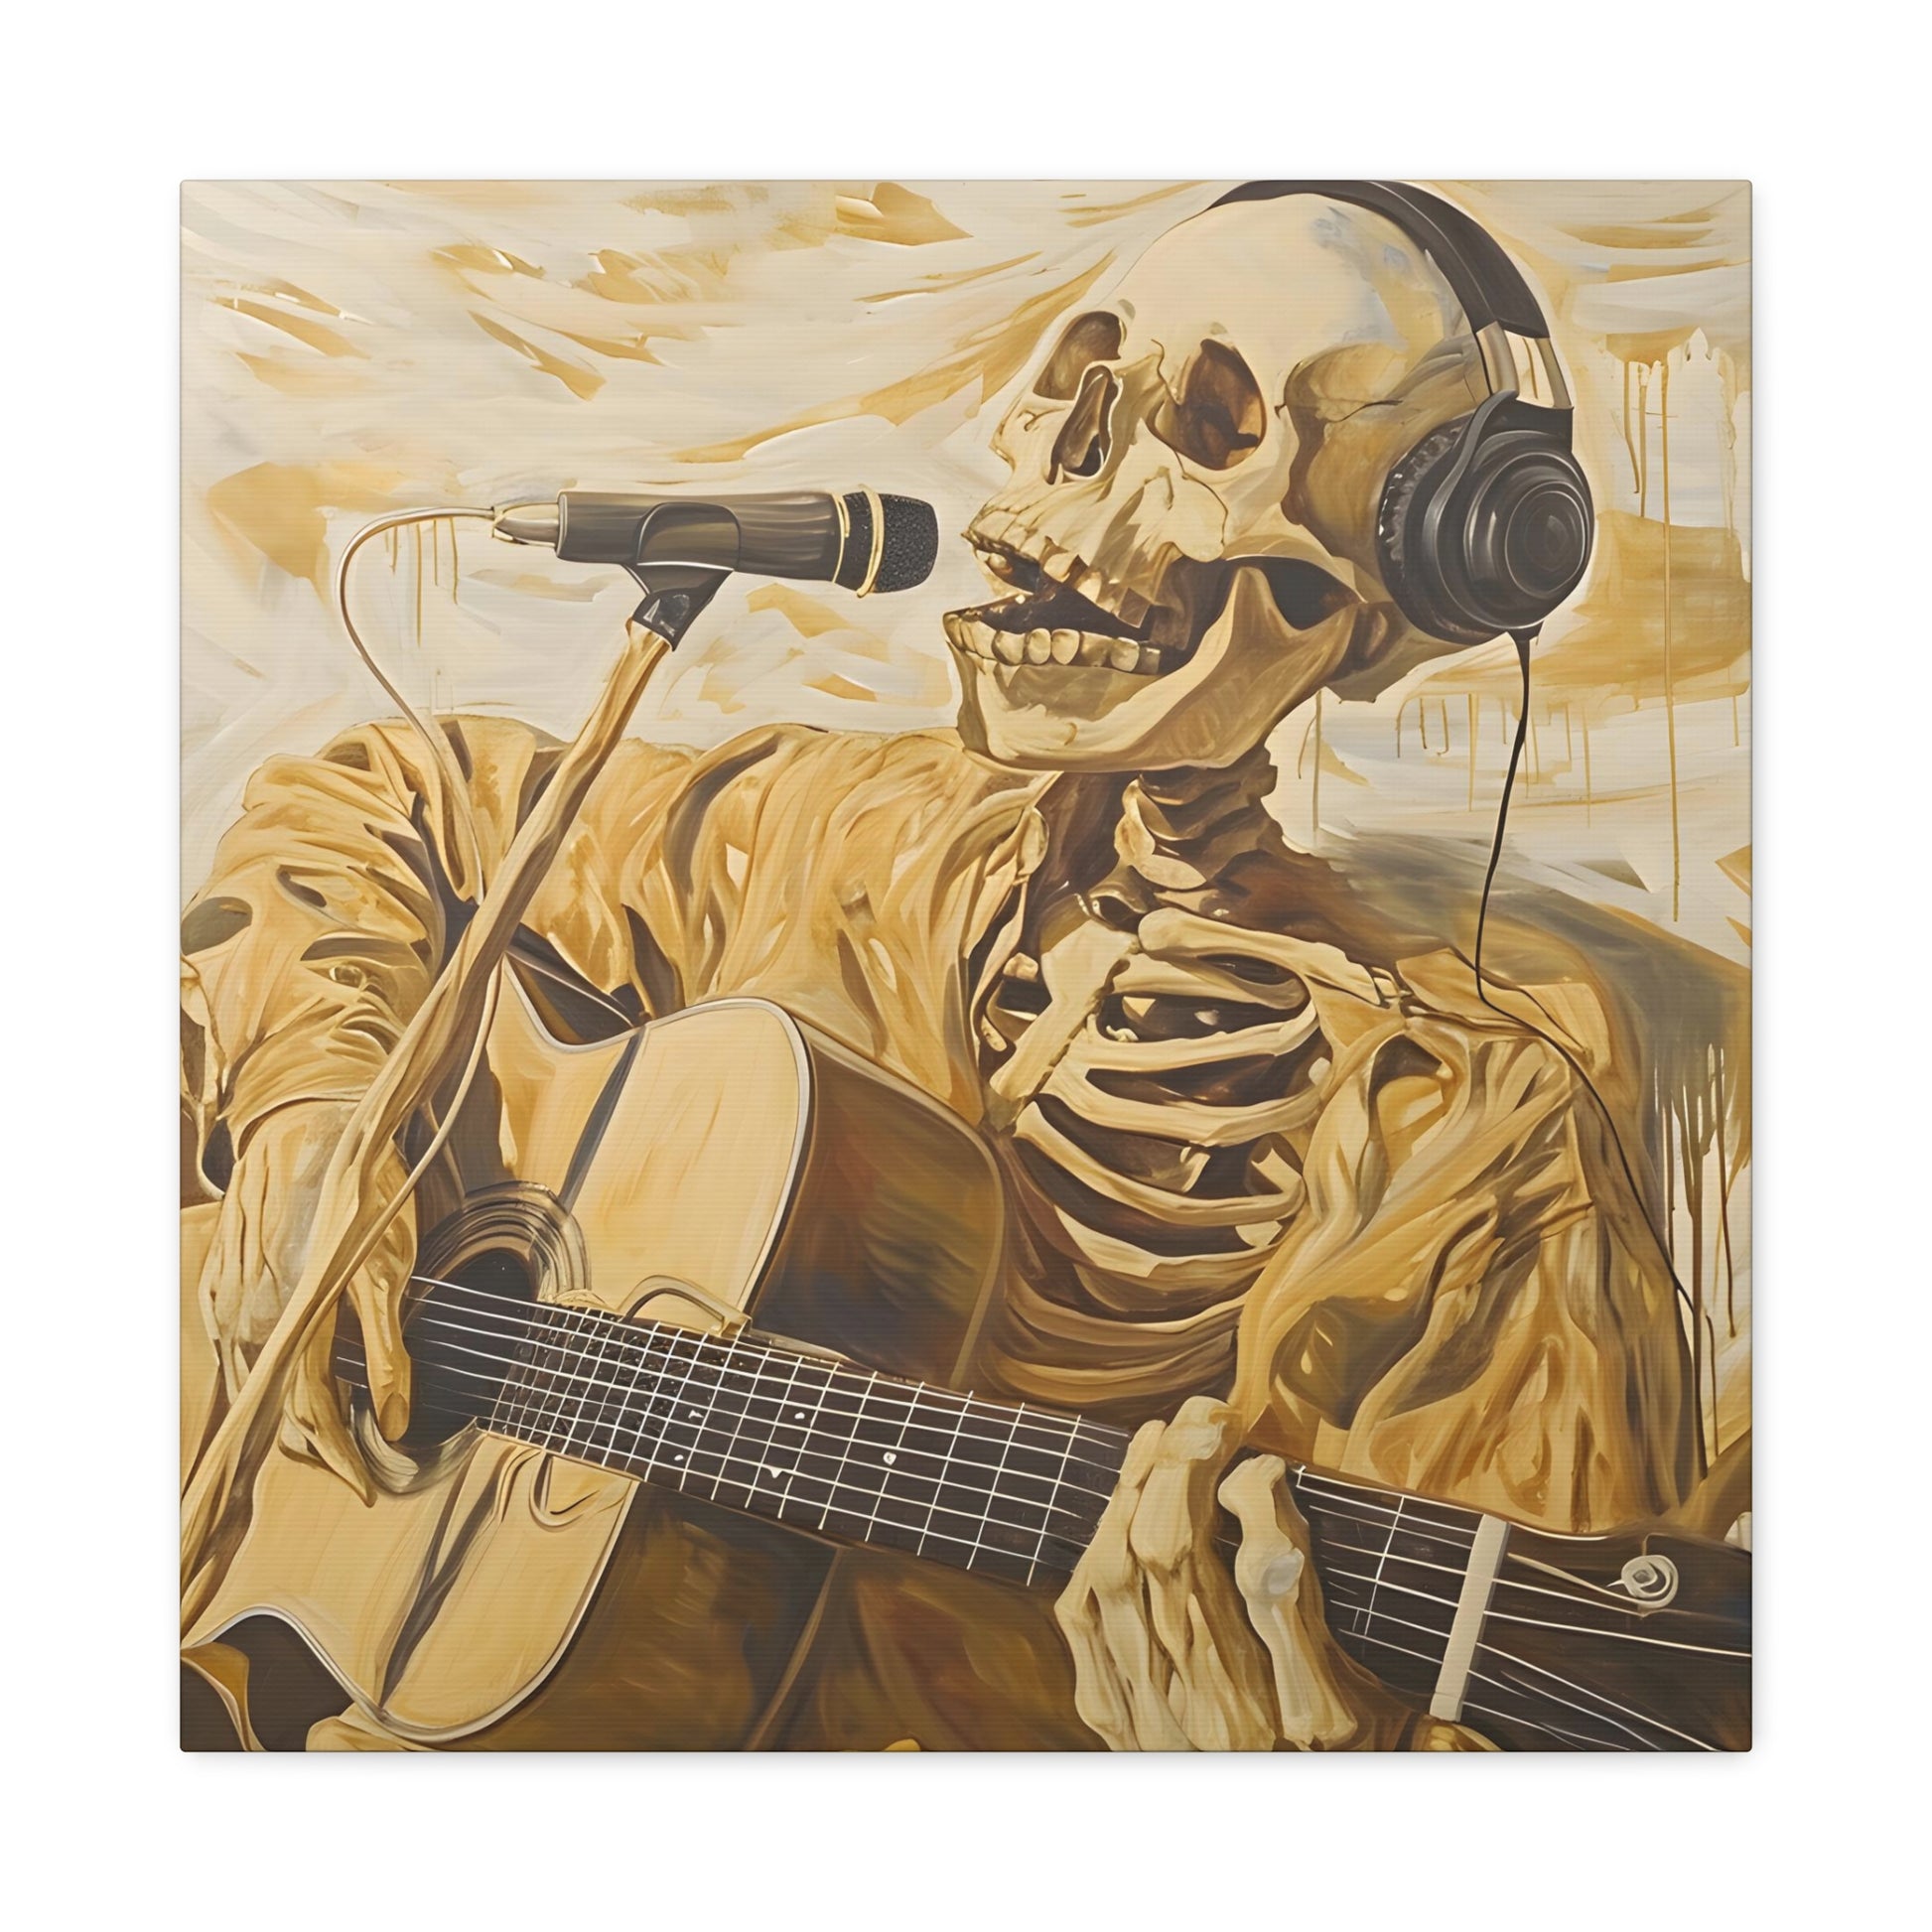 image 3 depicting a skeleton singing into a microphone, embodying music's redemptive power, inspired by 'American Pie' lyrics, with golden tones symbolizing music's sanctity